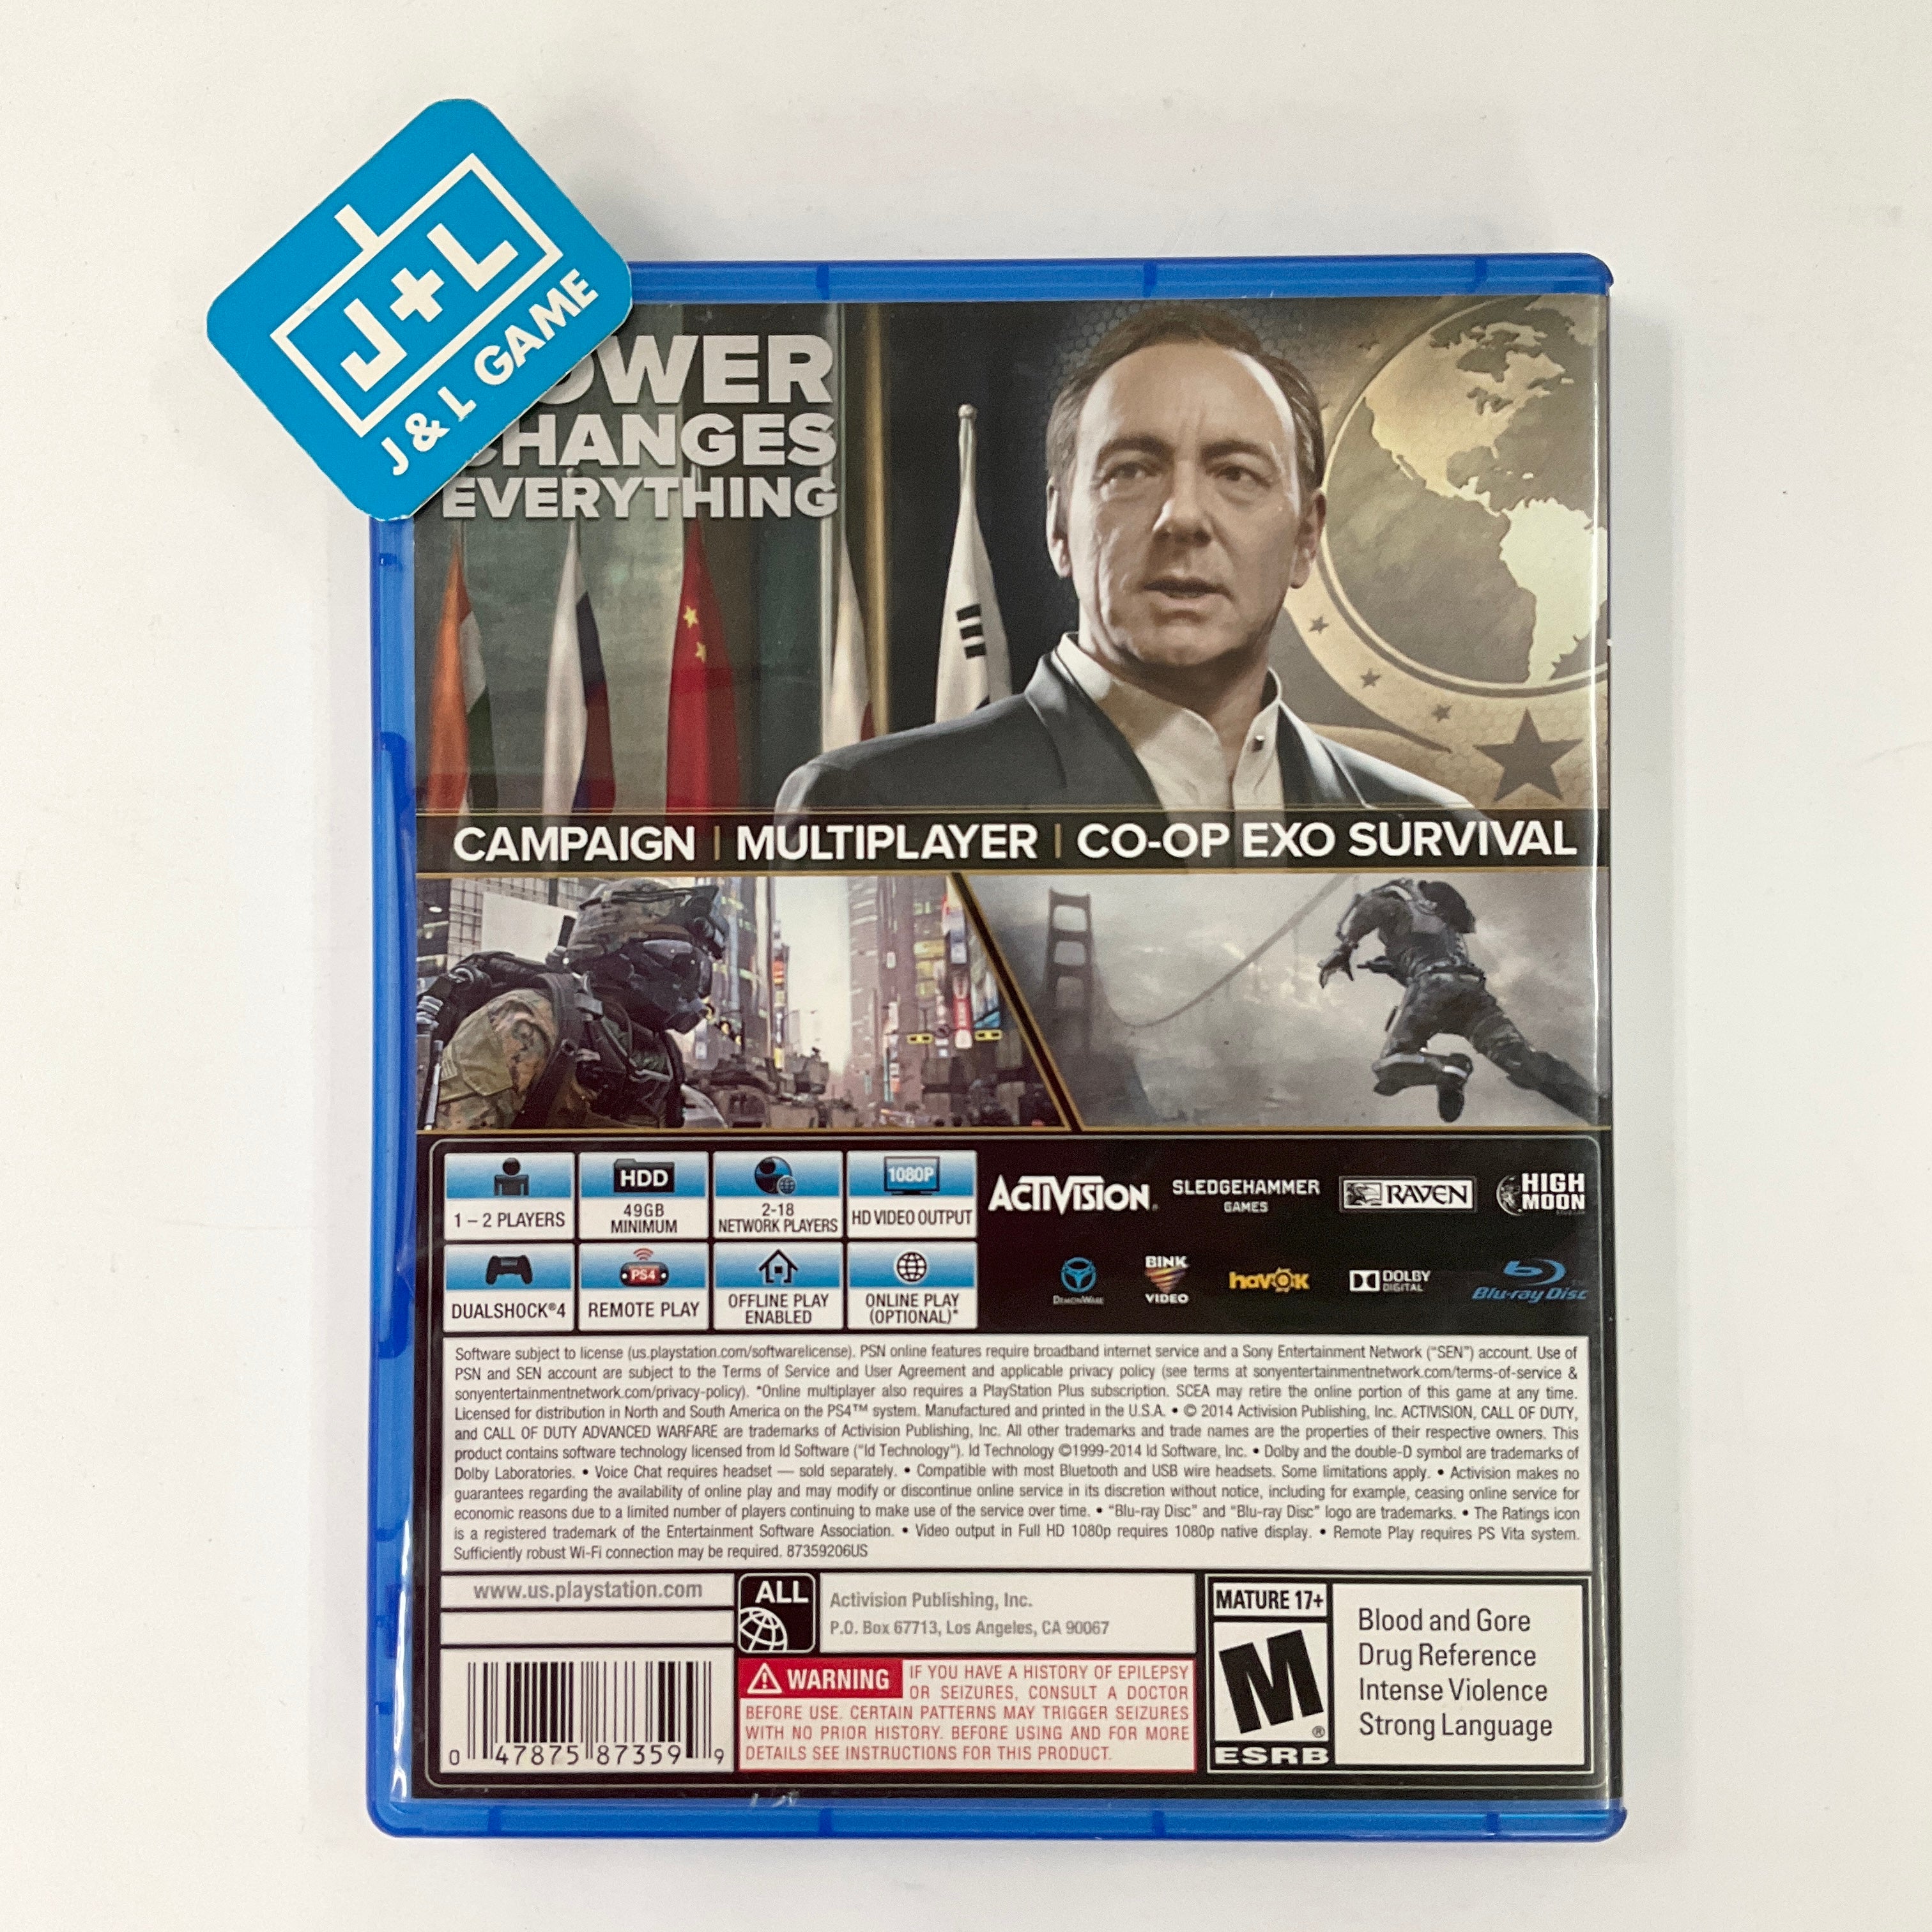 Call of Duty: Advanced Warfare - (PS4) PlayStation 4 [Pre-Owned] Video Games ACTIVISION   